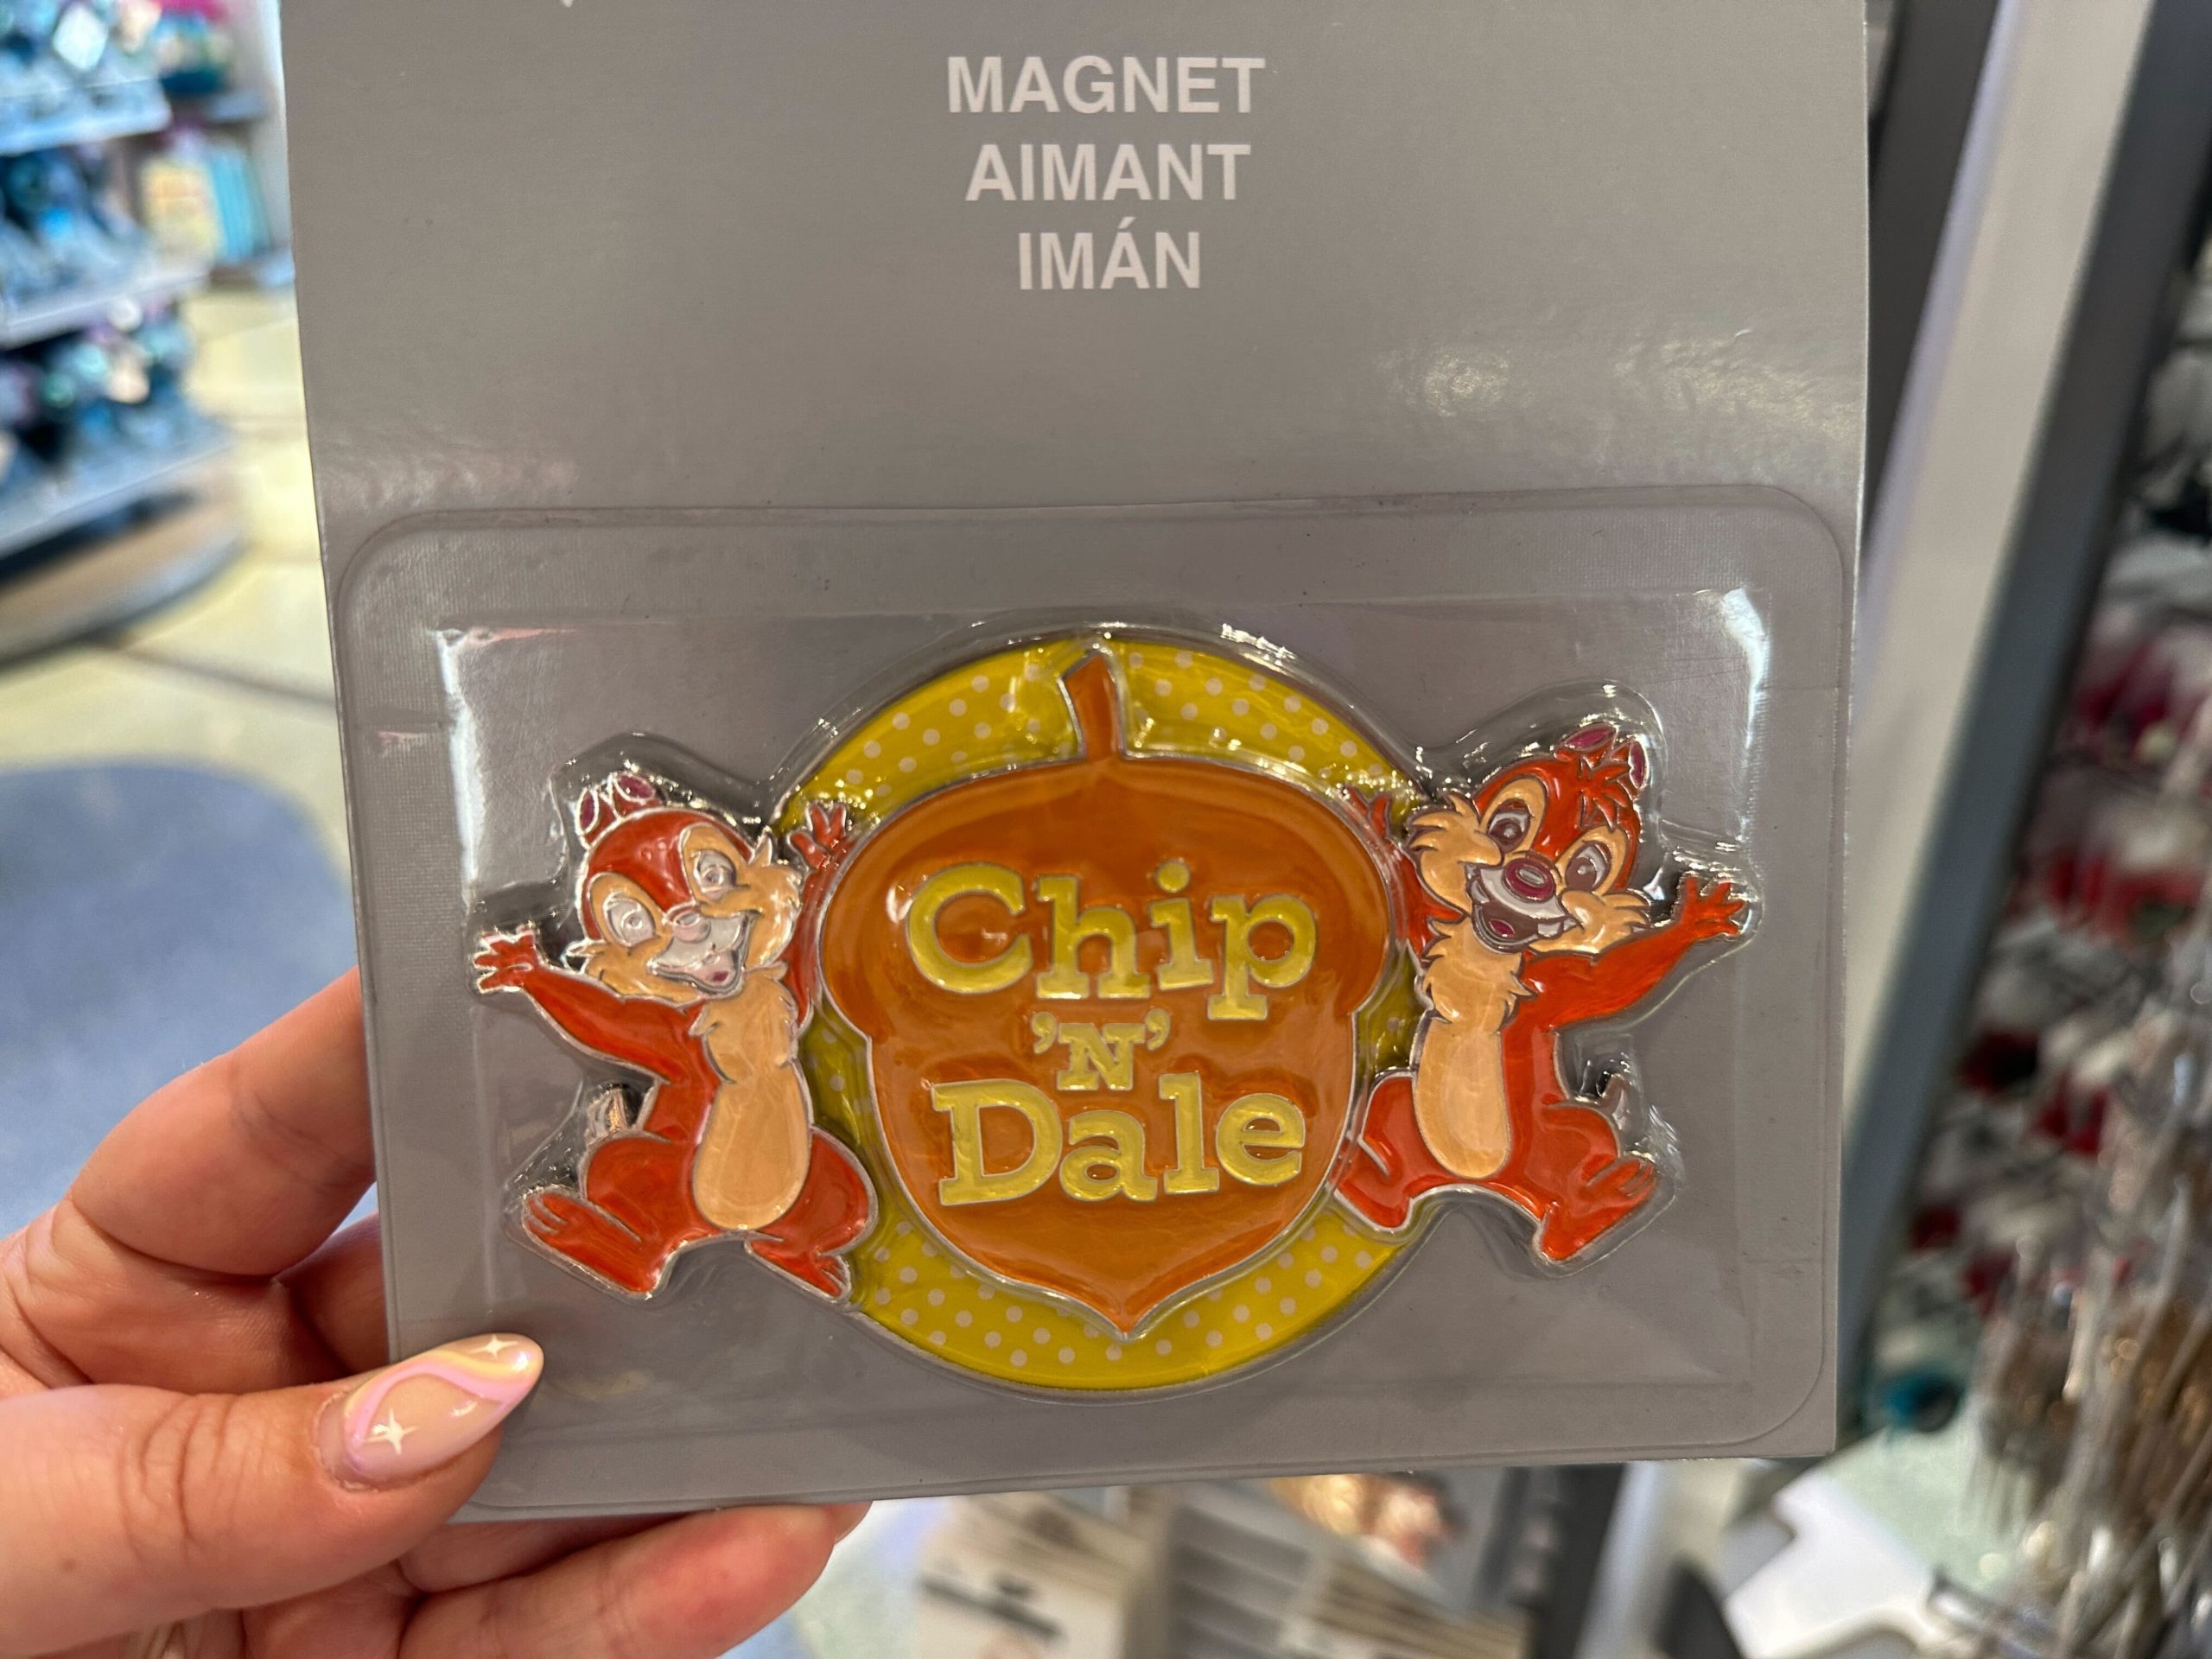 This Chip 'N' Dale Magnet Sure is Nutty! - MickeyBlog.com